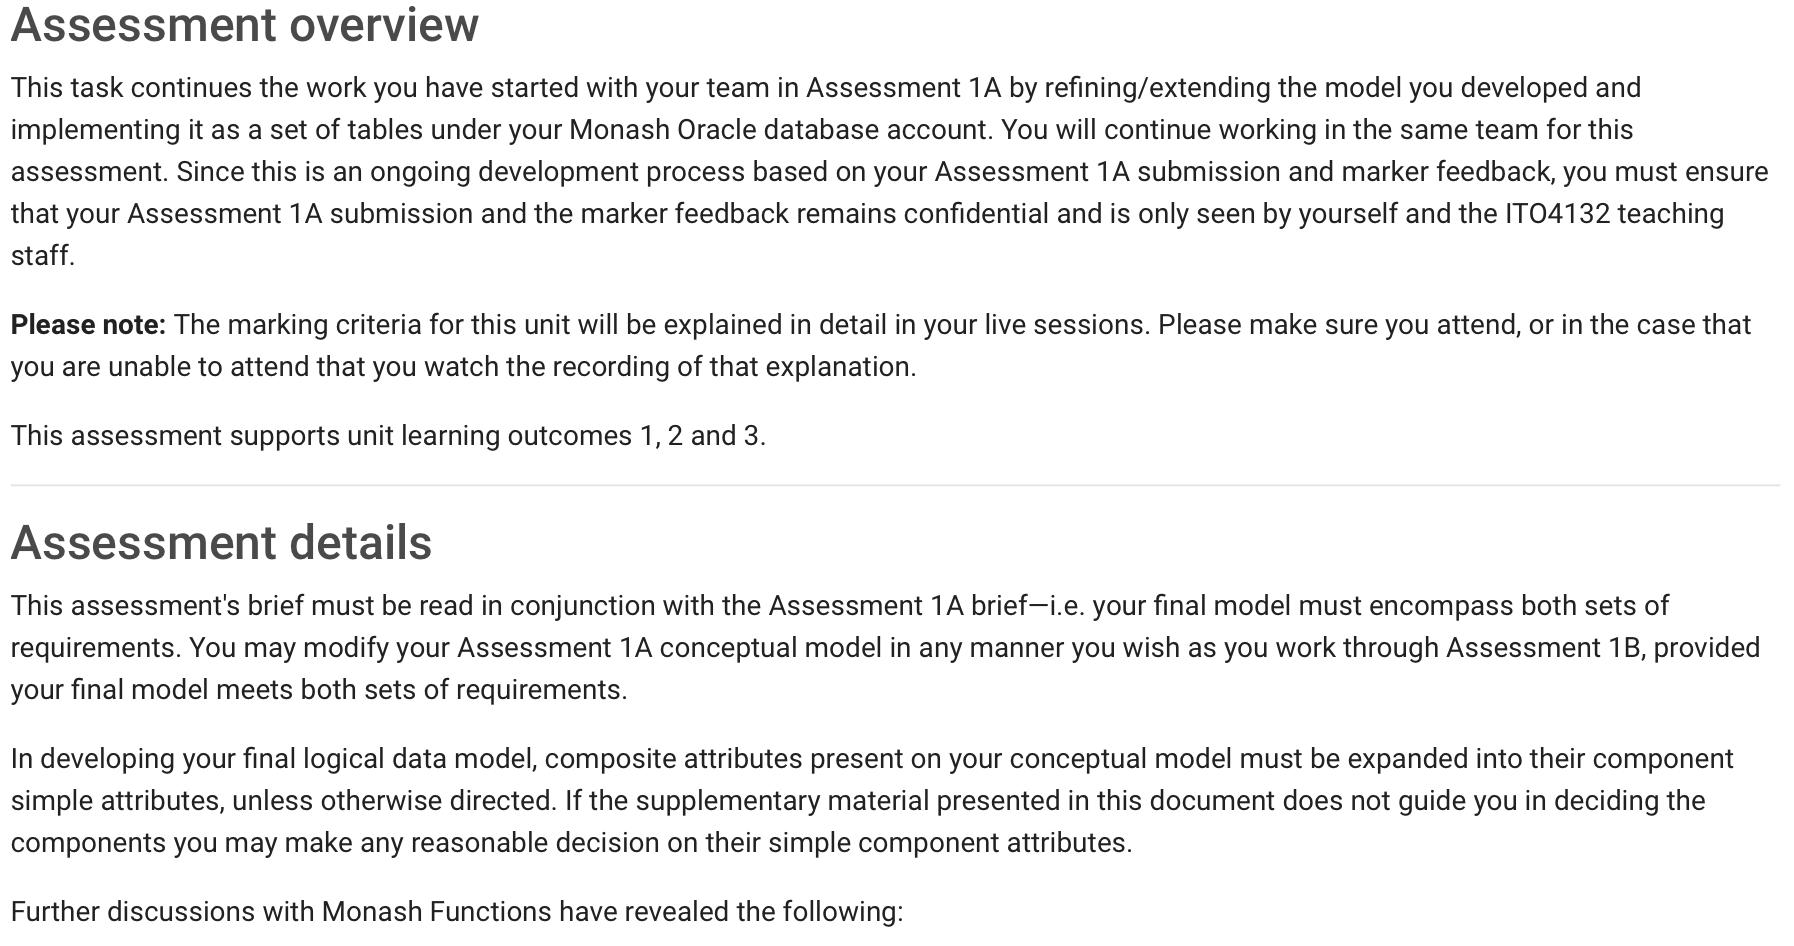 Assessment overview This task continues the work you have started with your team in Assessment 1A by